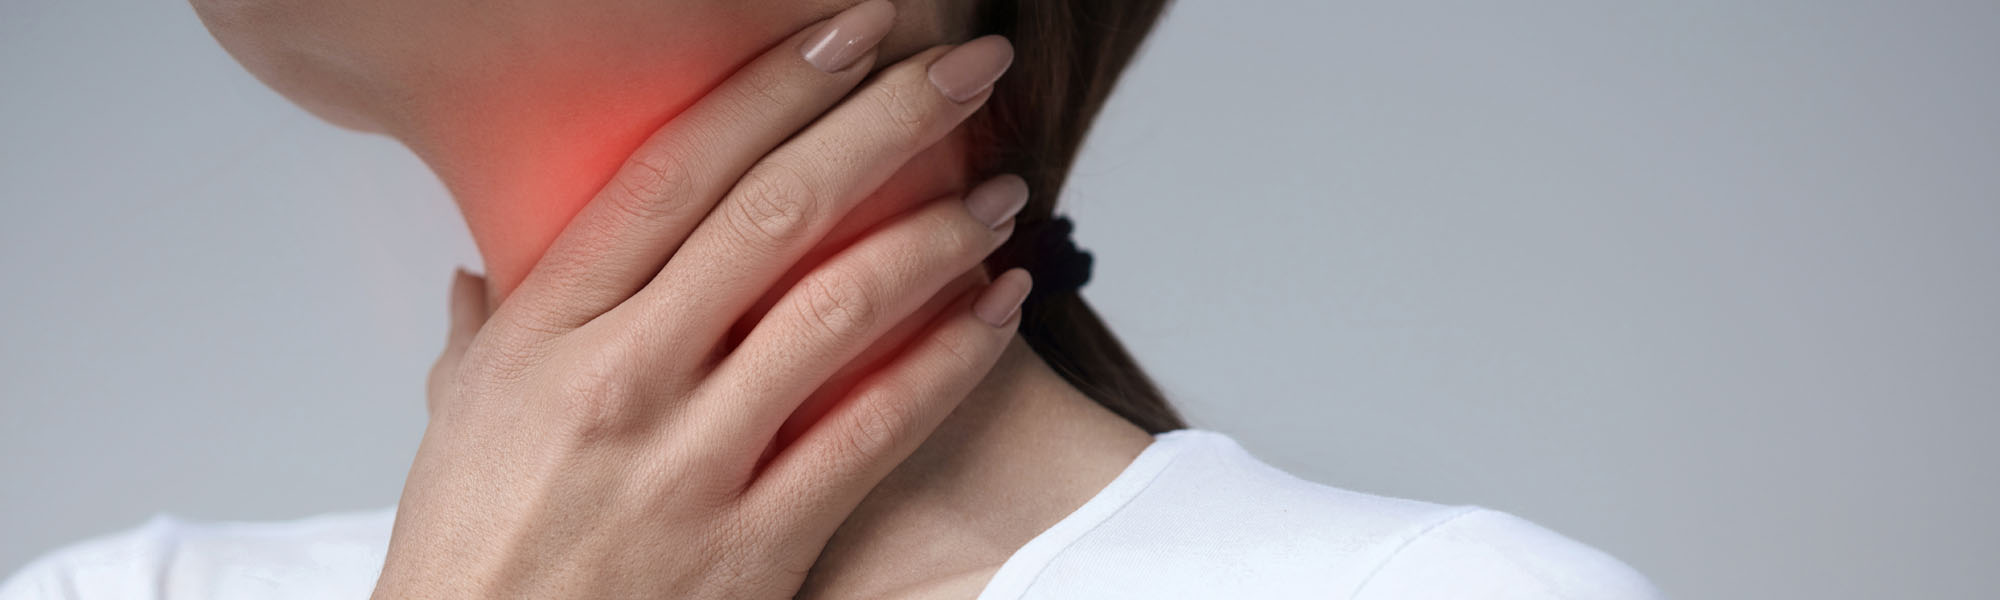 Woman with Sore Throat